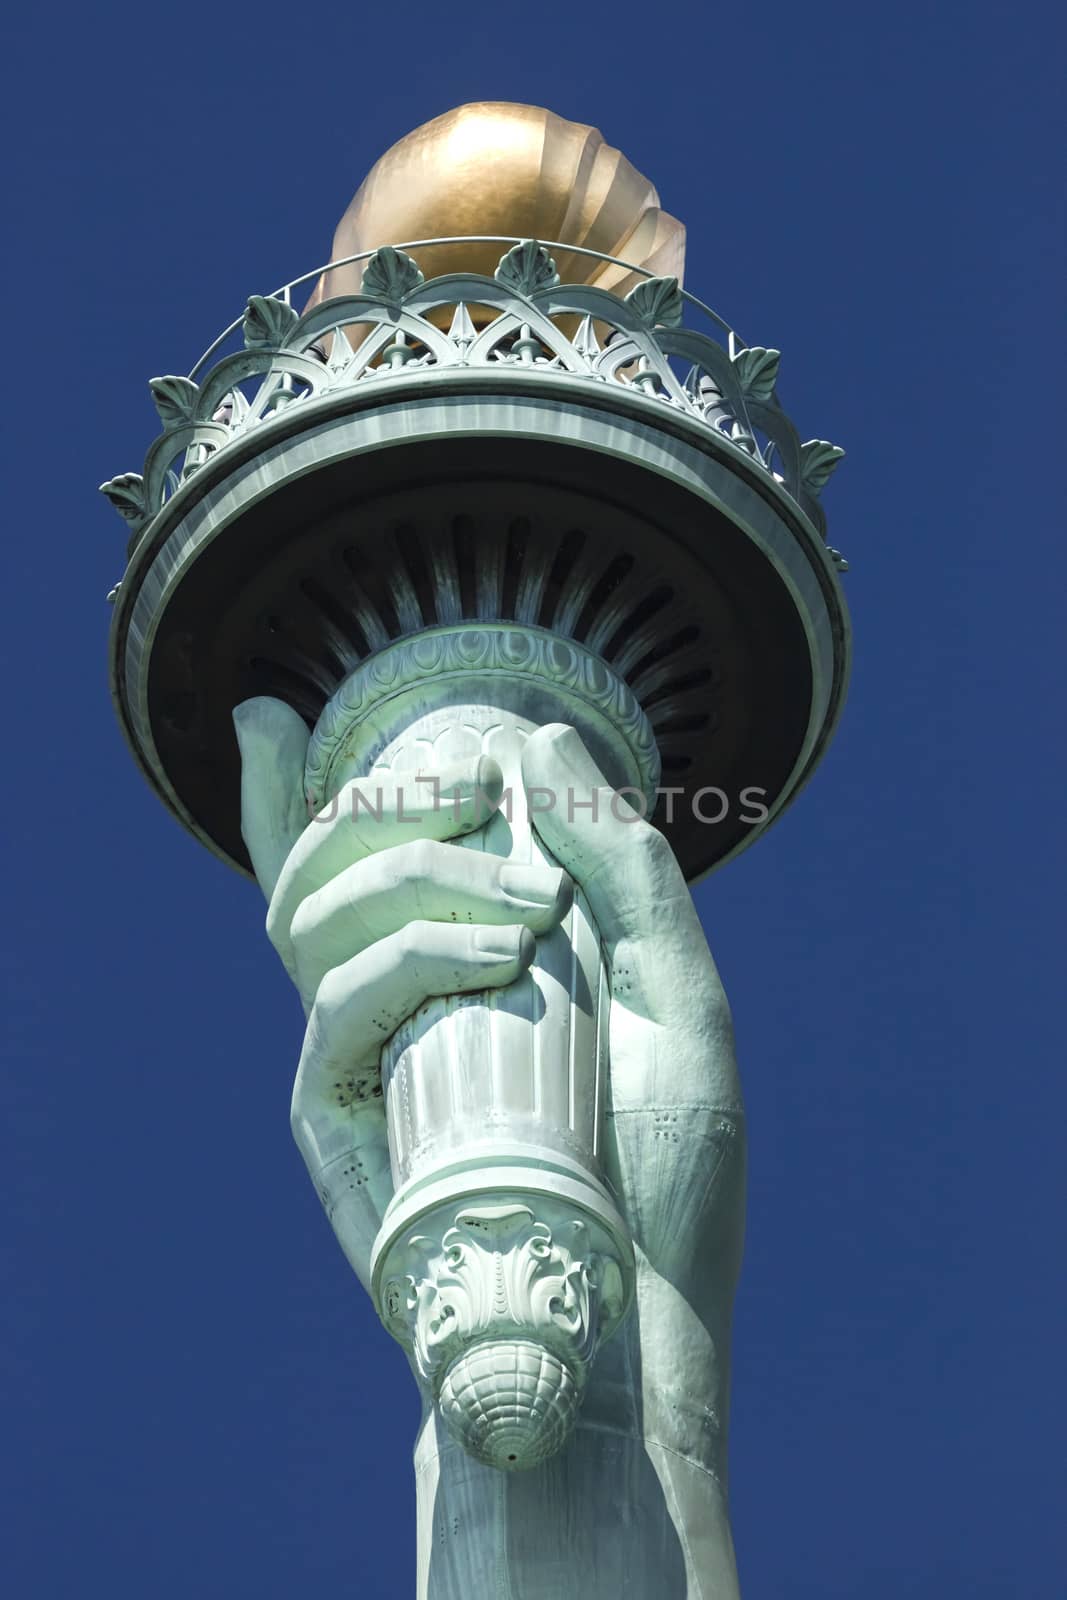 The Statue of Liberty the Torch Detail by hanusst